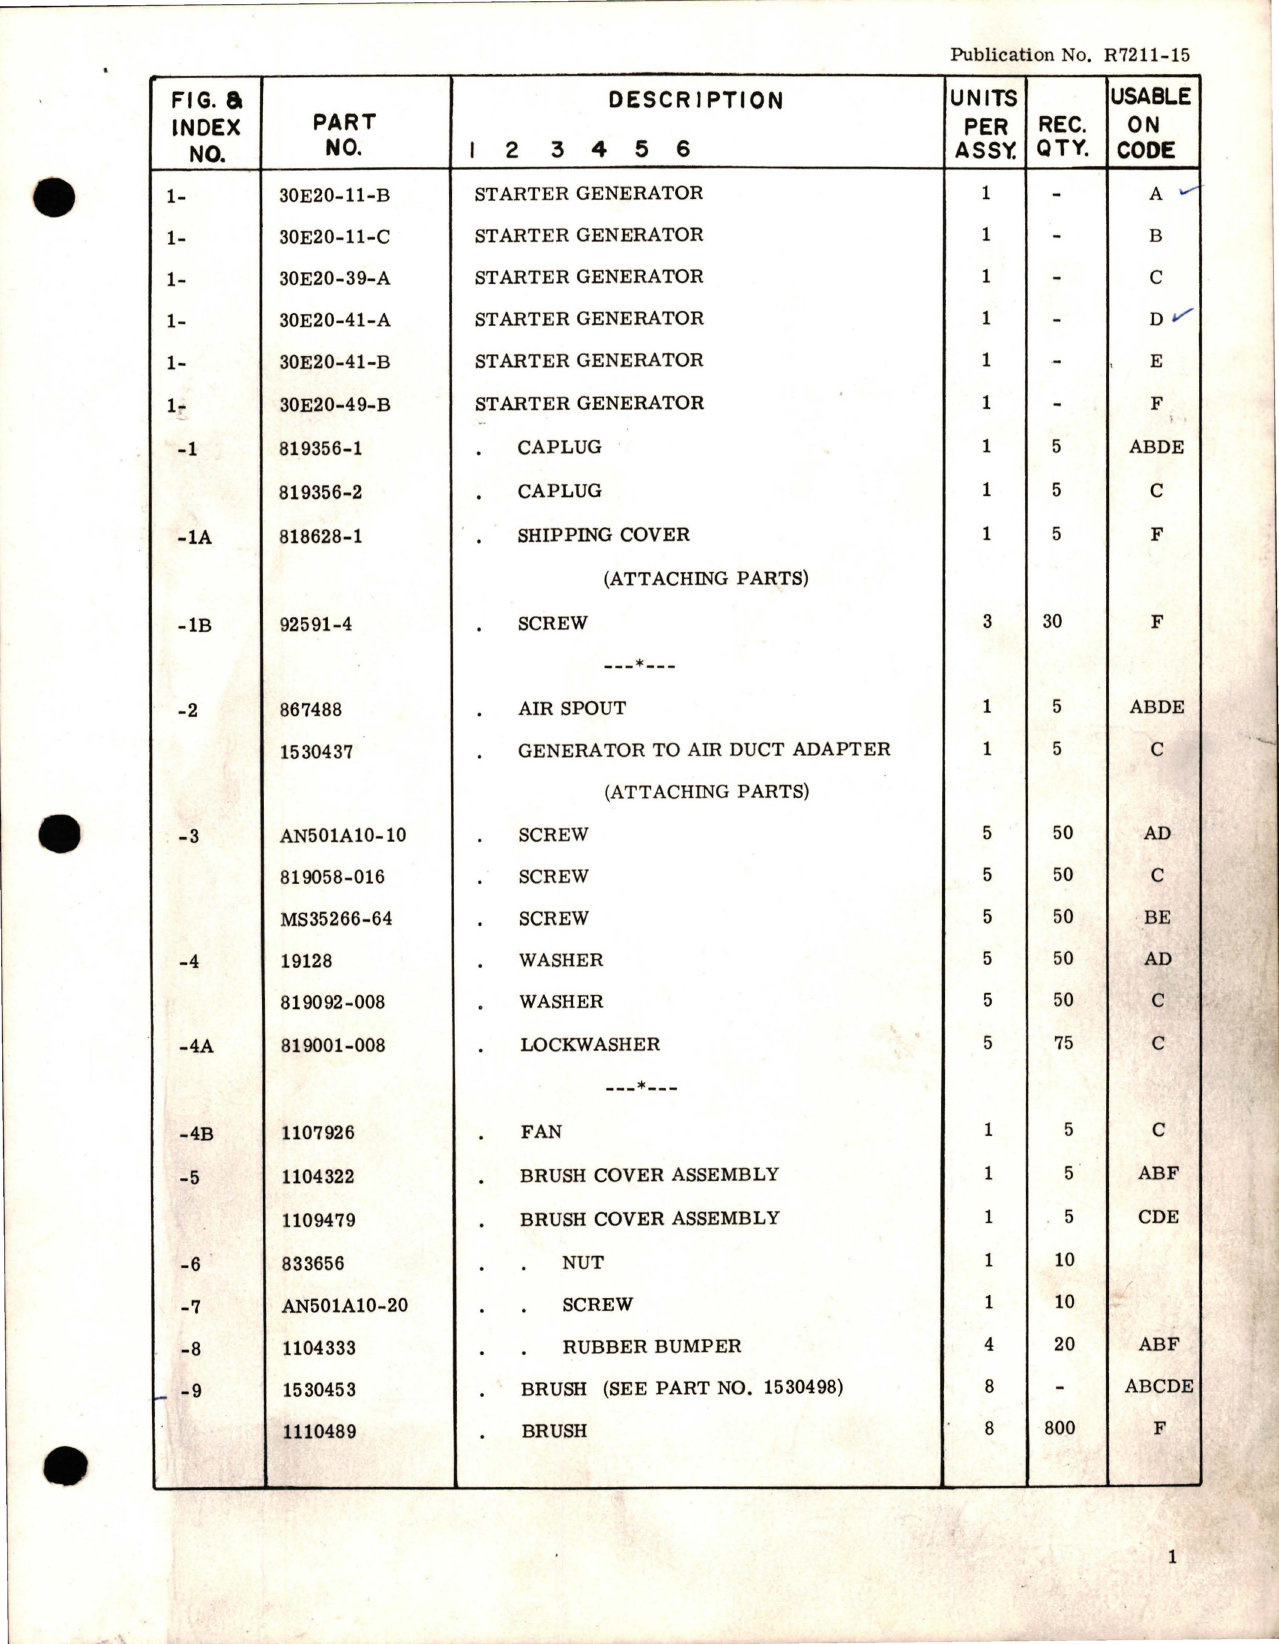 Sample page 5 from AirCorps Library document: Illustrated Parts List for Starter Generator